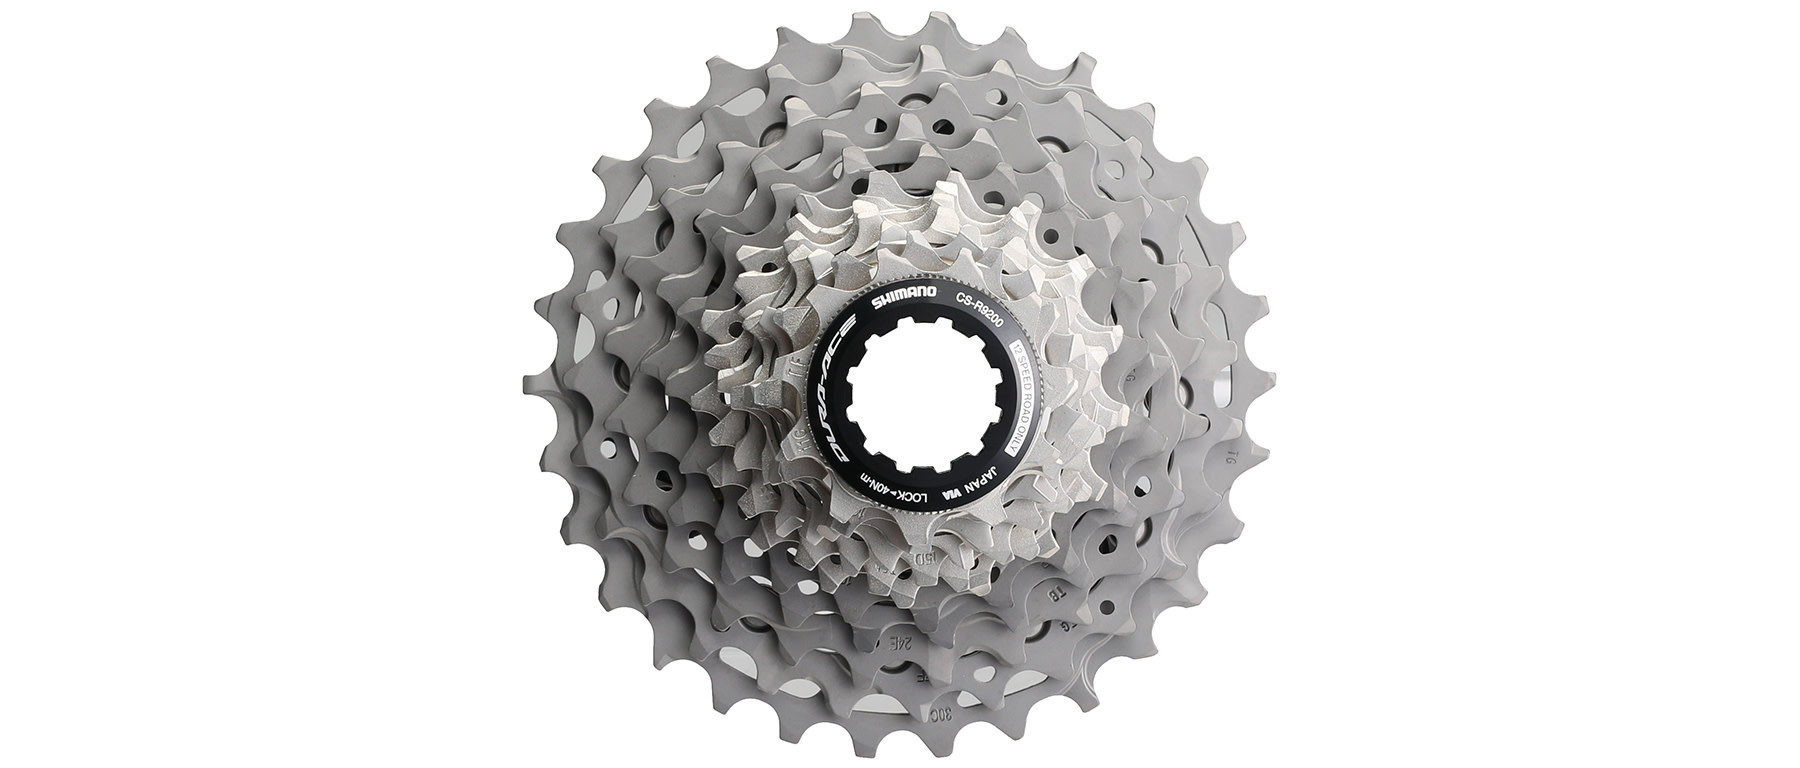 SHIMANO, Cassette, Dura Ace CS-R9200, Speed: 12, 11-30T - The